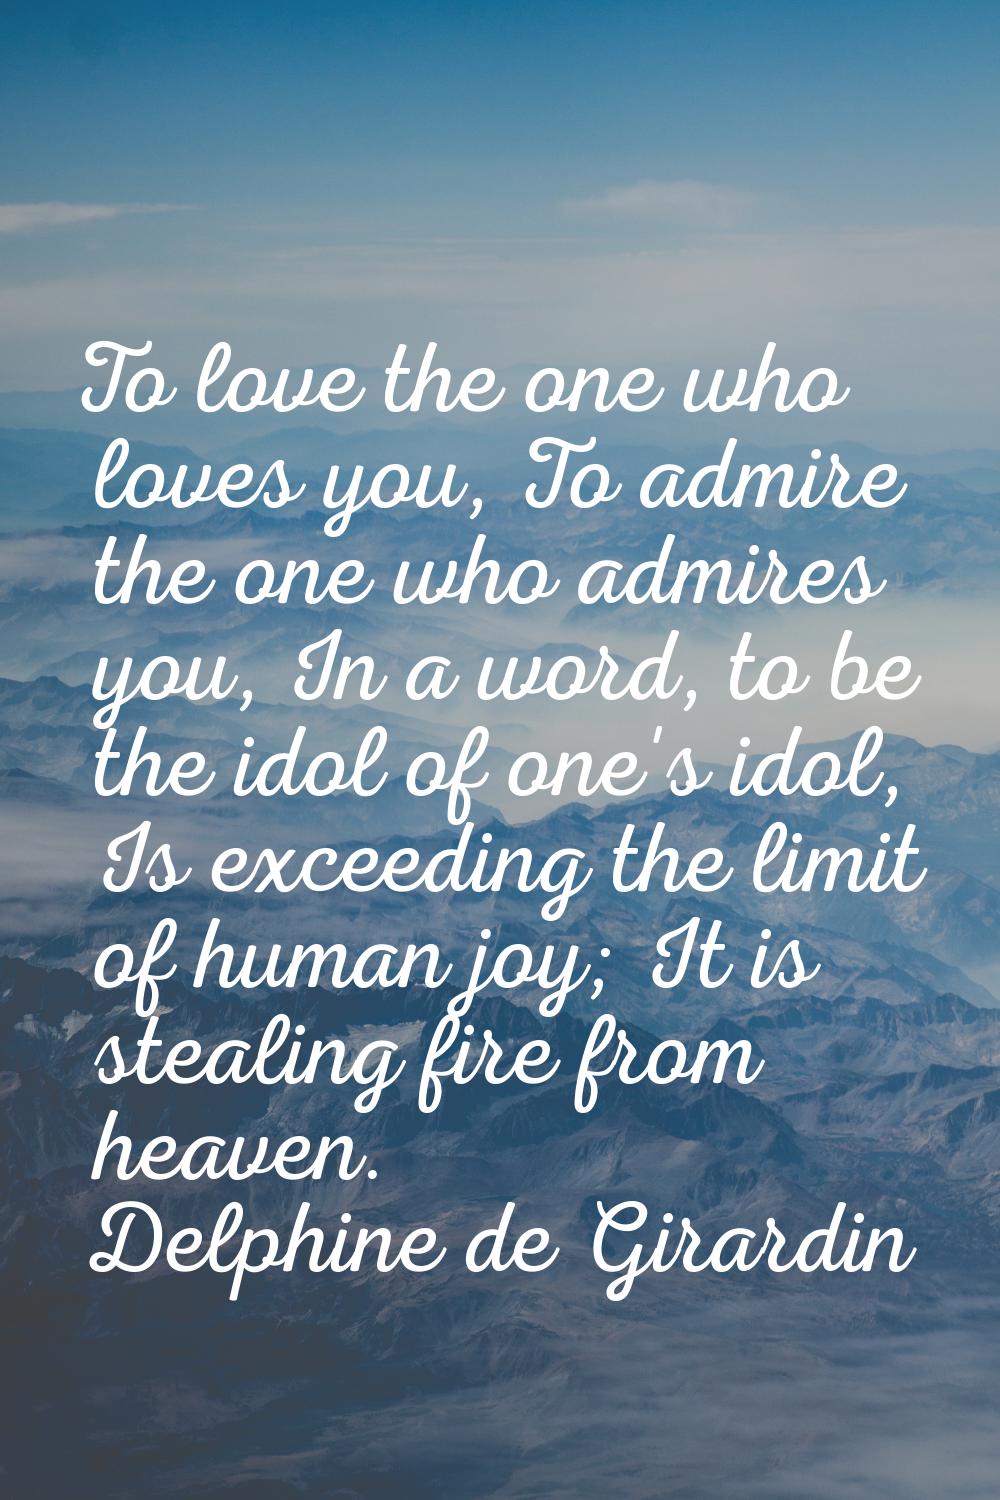 To love the one who loves you, To admire the one who admires you, In a word, to be the idol of one'